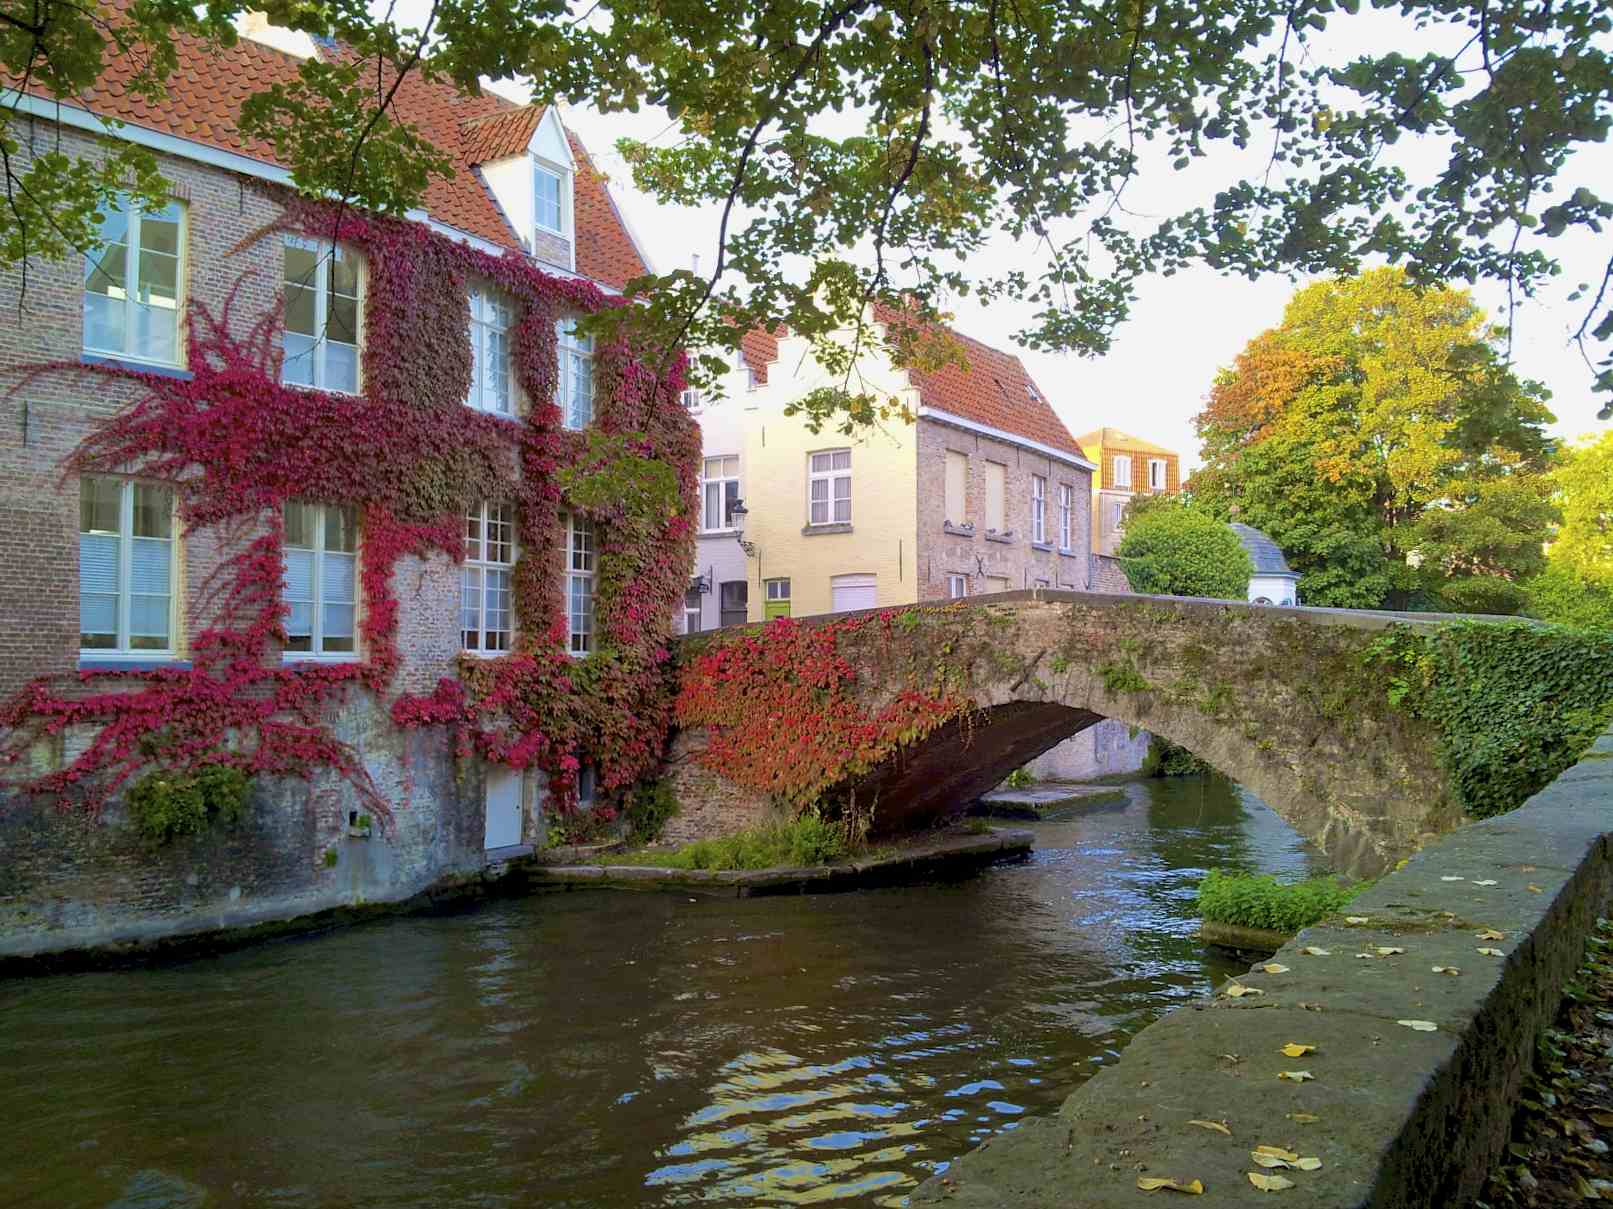 several buildings sit along a river with an arched bridge